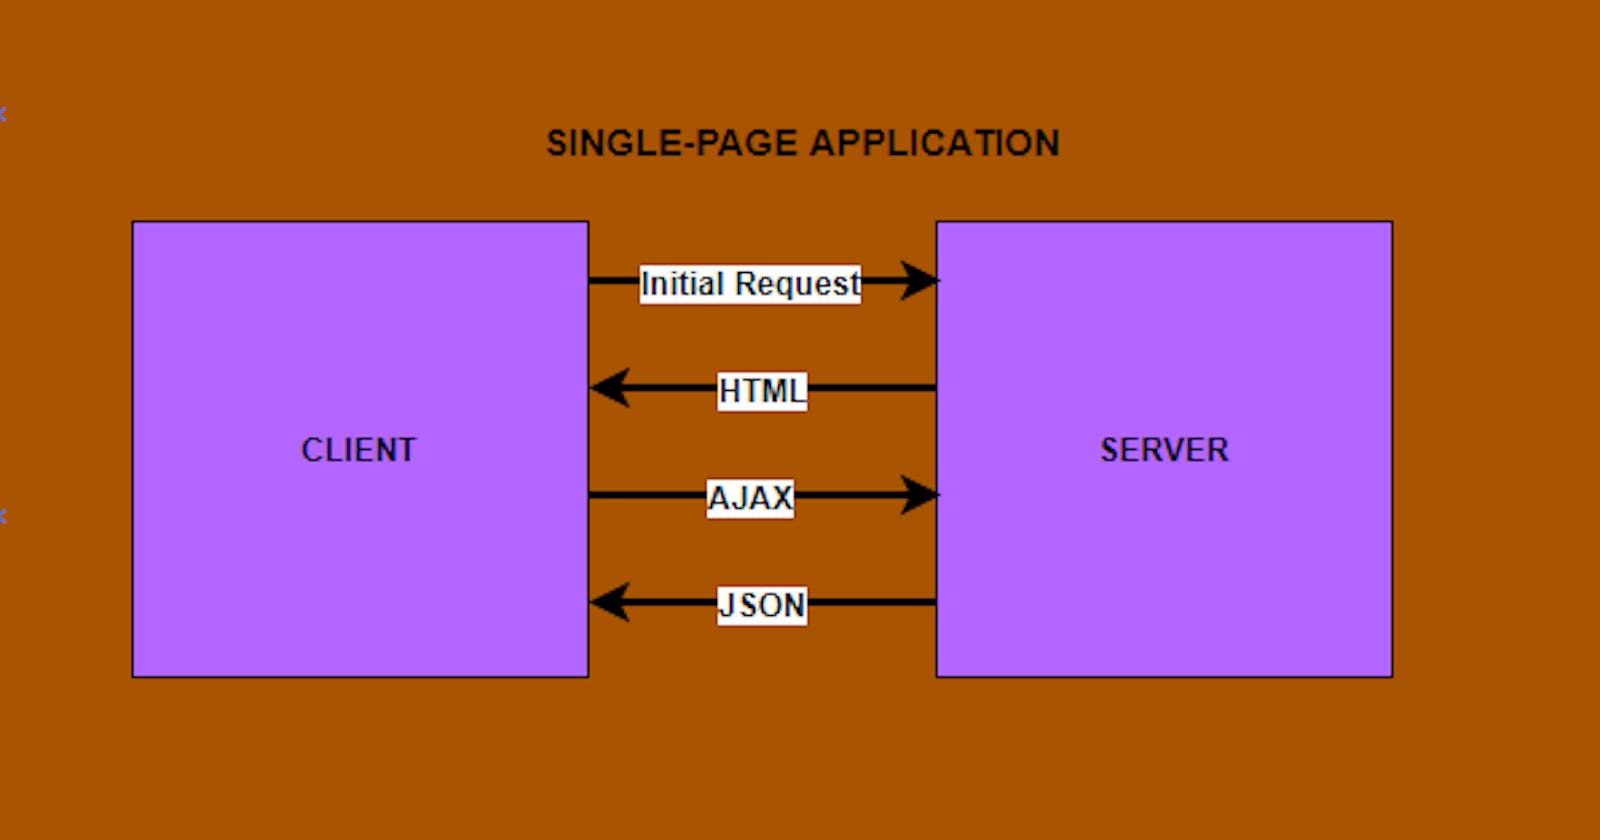 What is a Single-page Application?